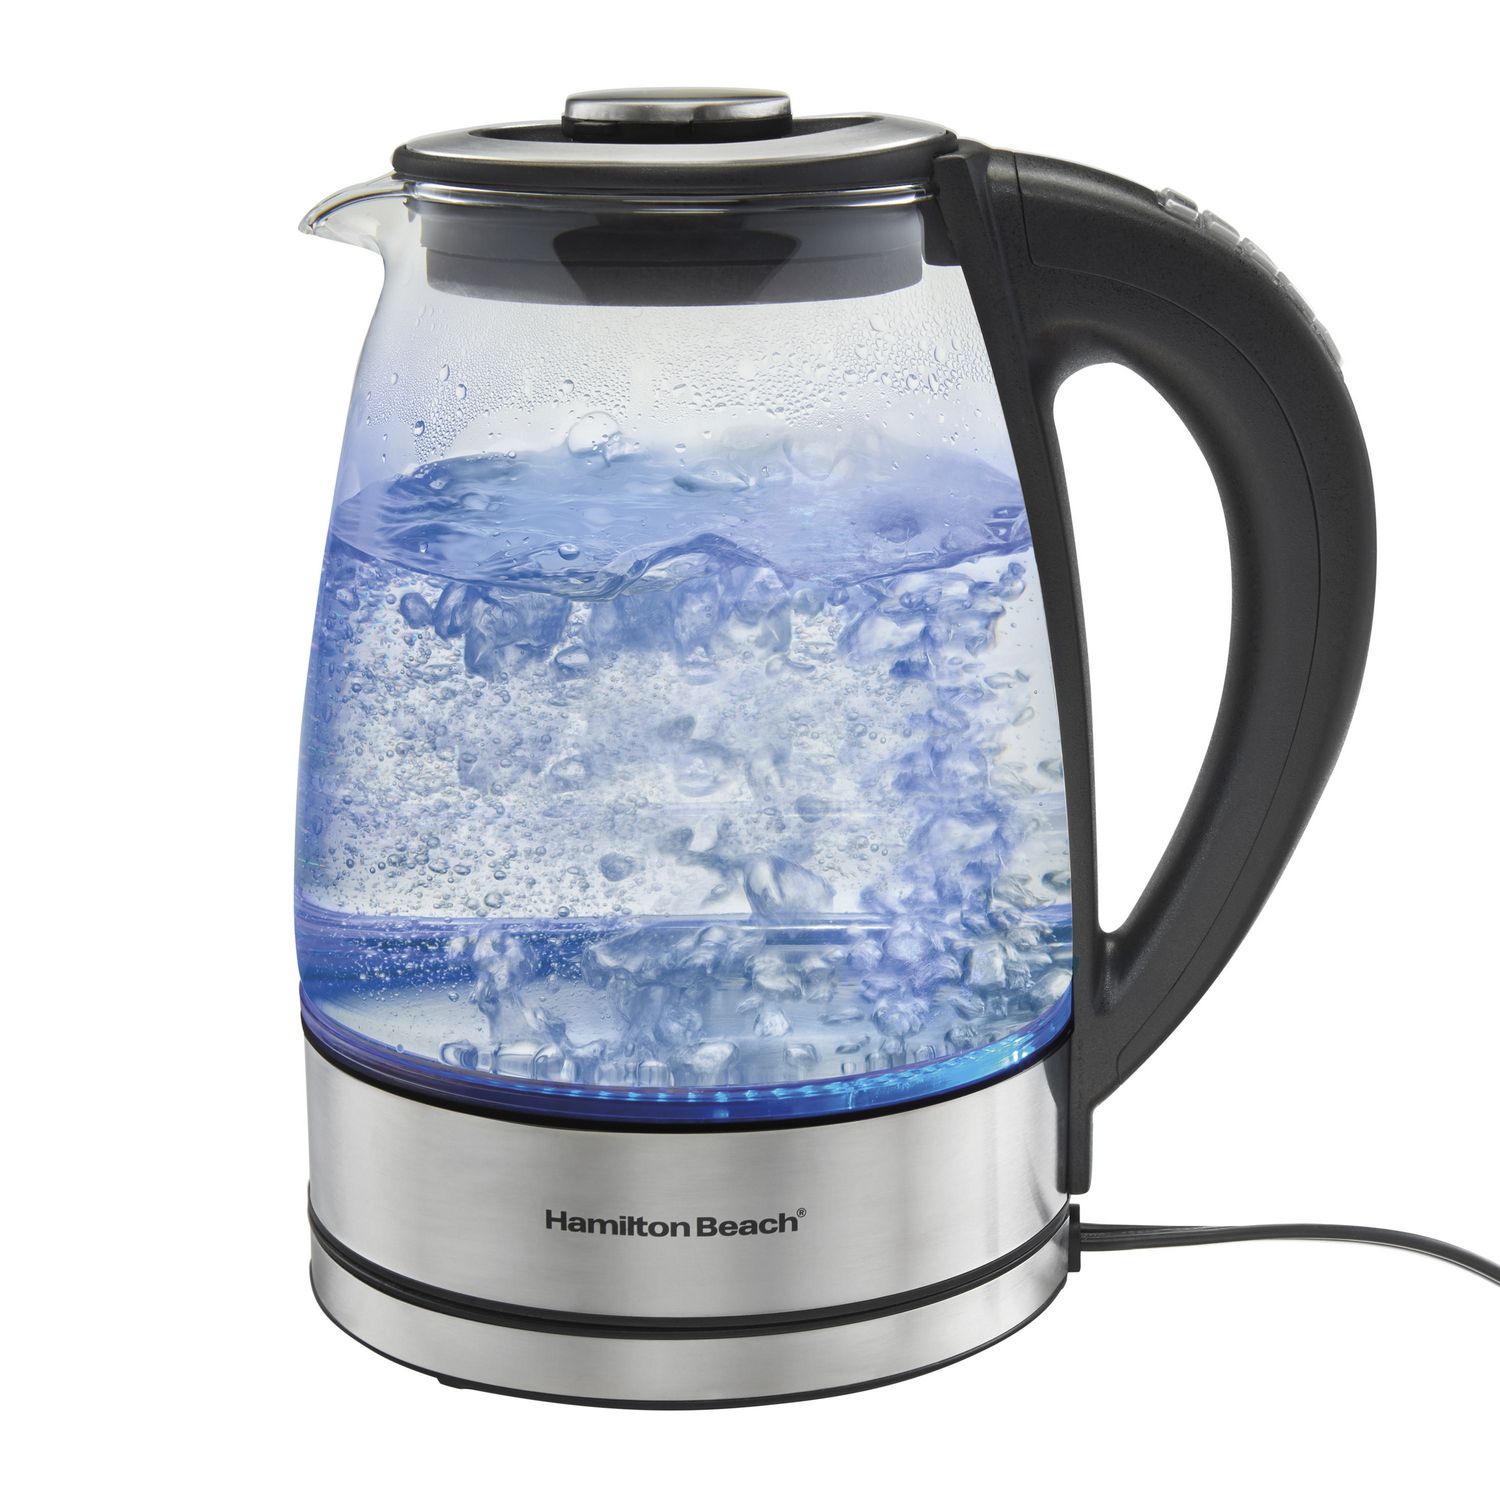 Hamilton Beach 40942, 1.7 L Variable Temperature Glass Kettle with